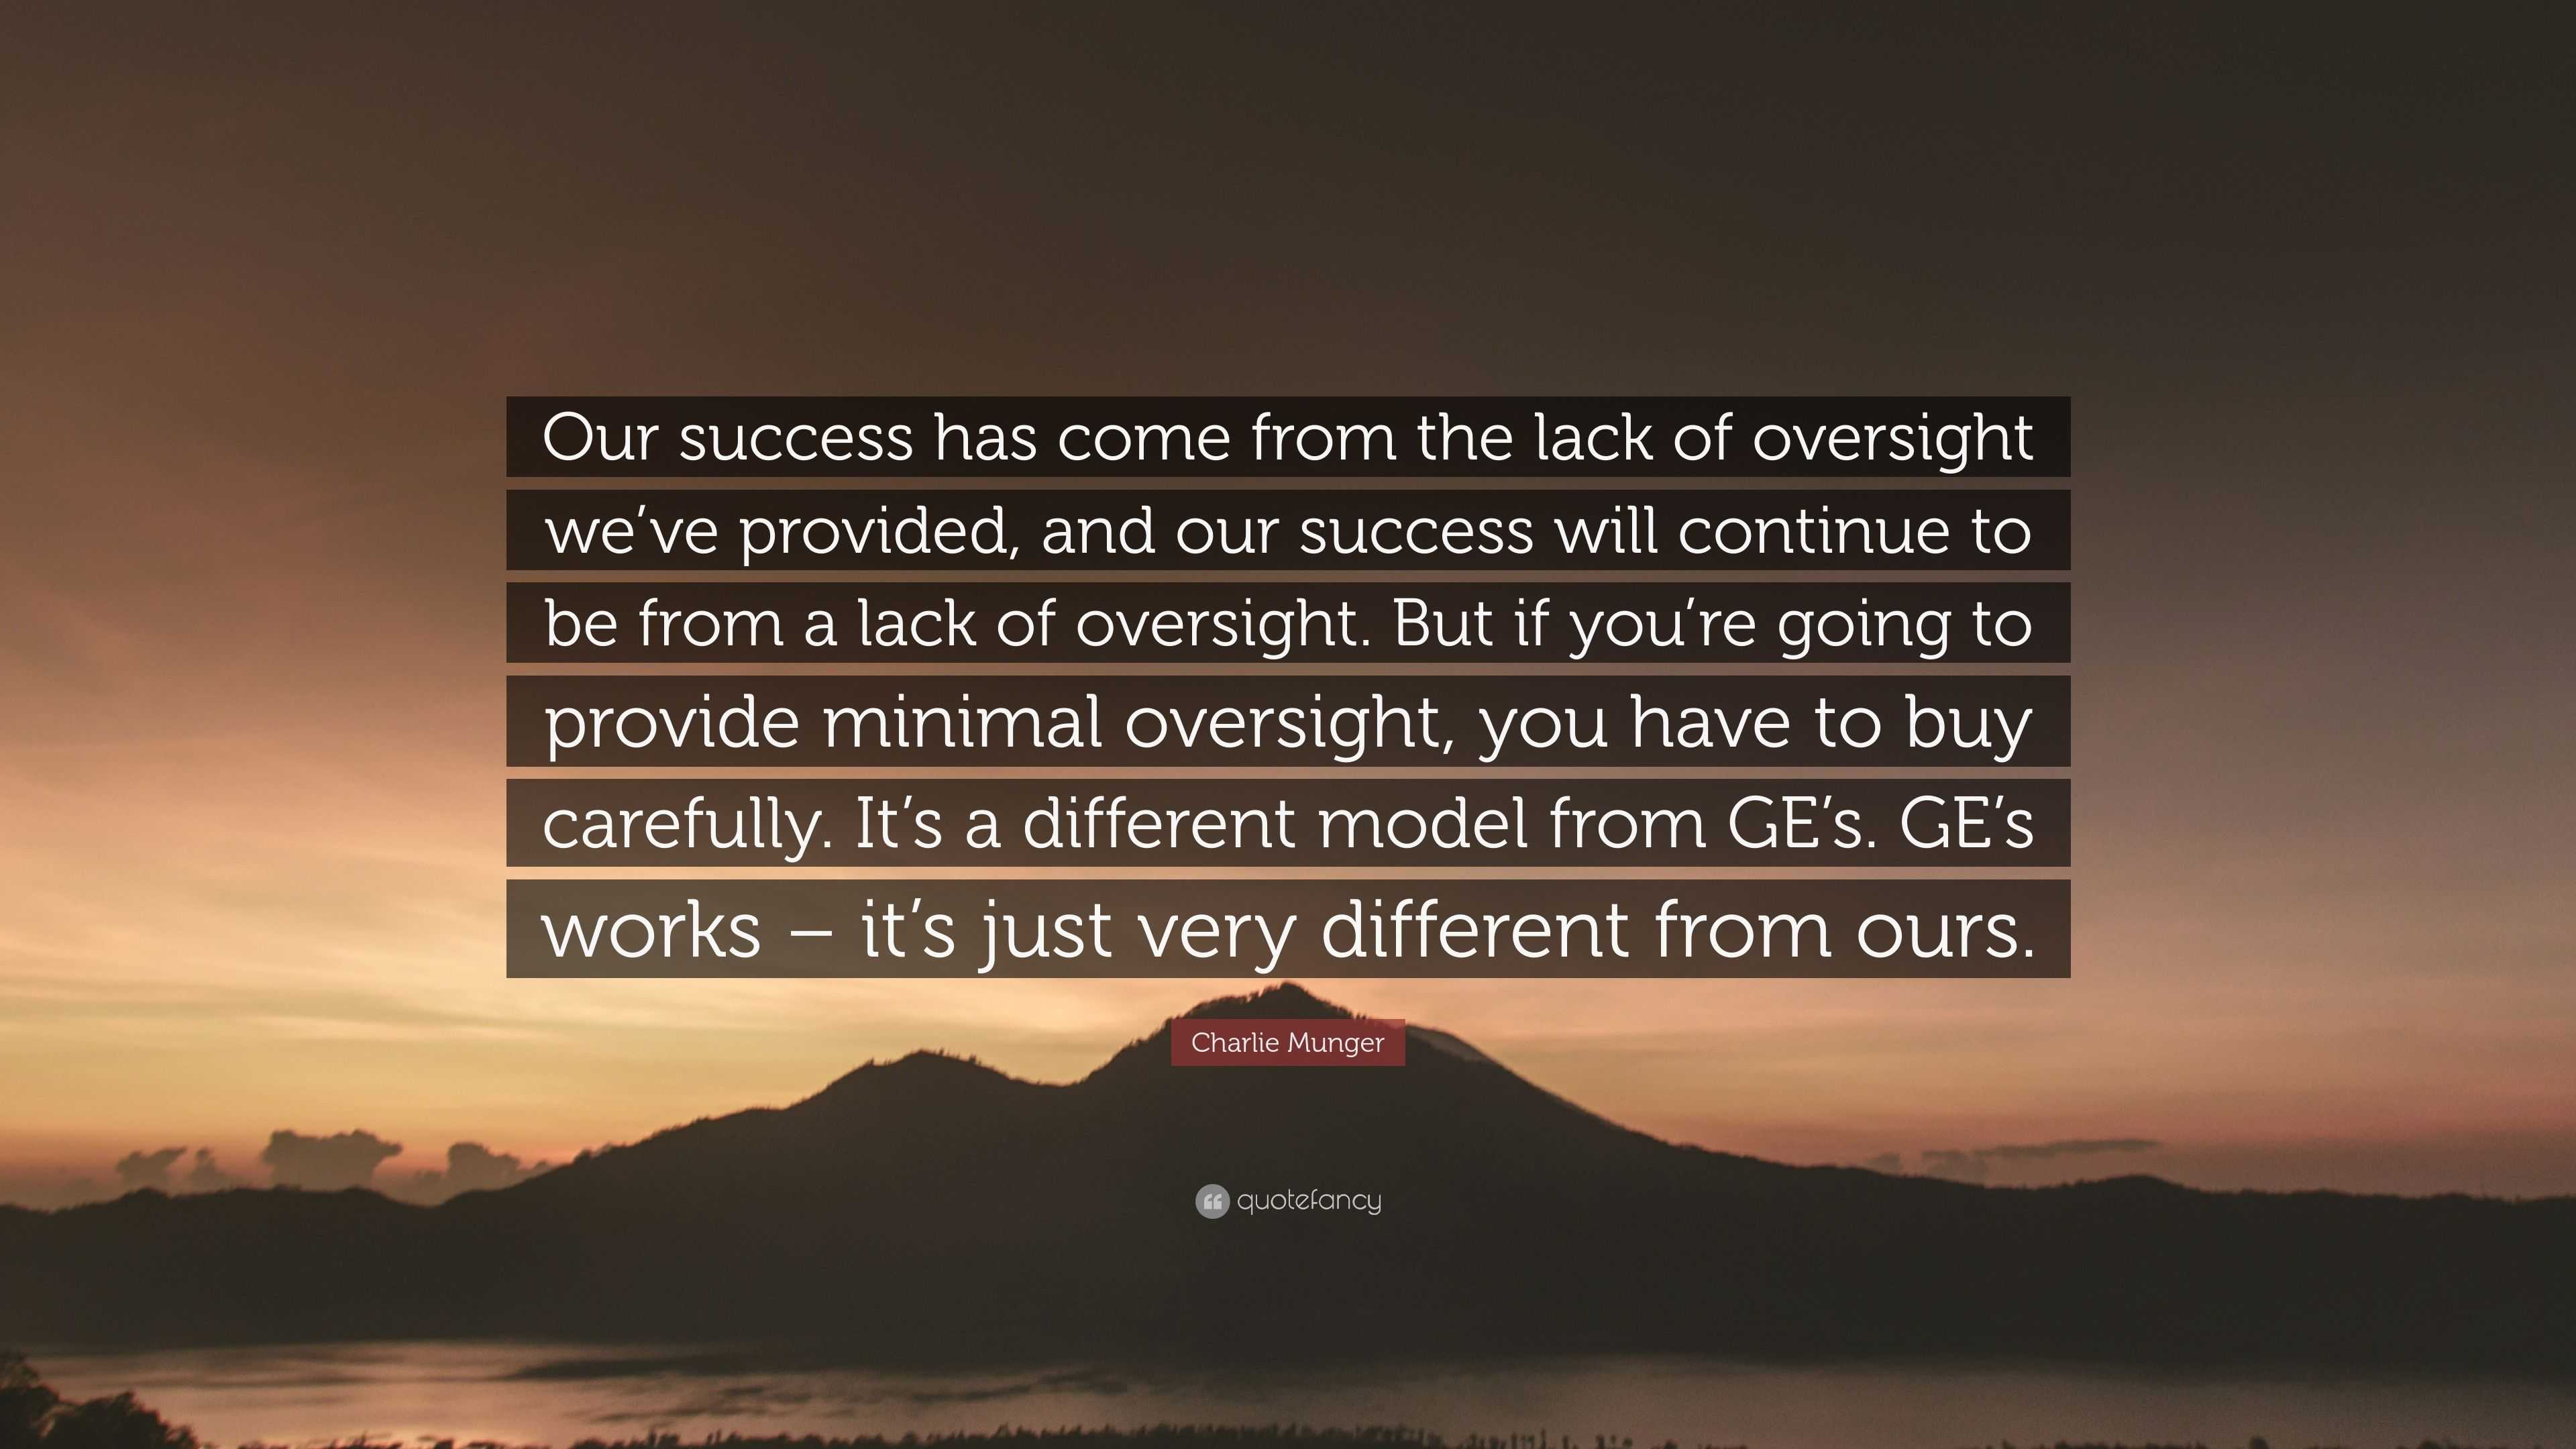 Charlie Munger Quote: “Our Success Has Come From The Lack Of Oversight We've Provided, And Our Success Will Continue To Be From A Lack Of Overs...”